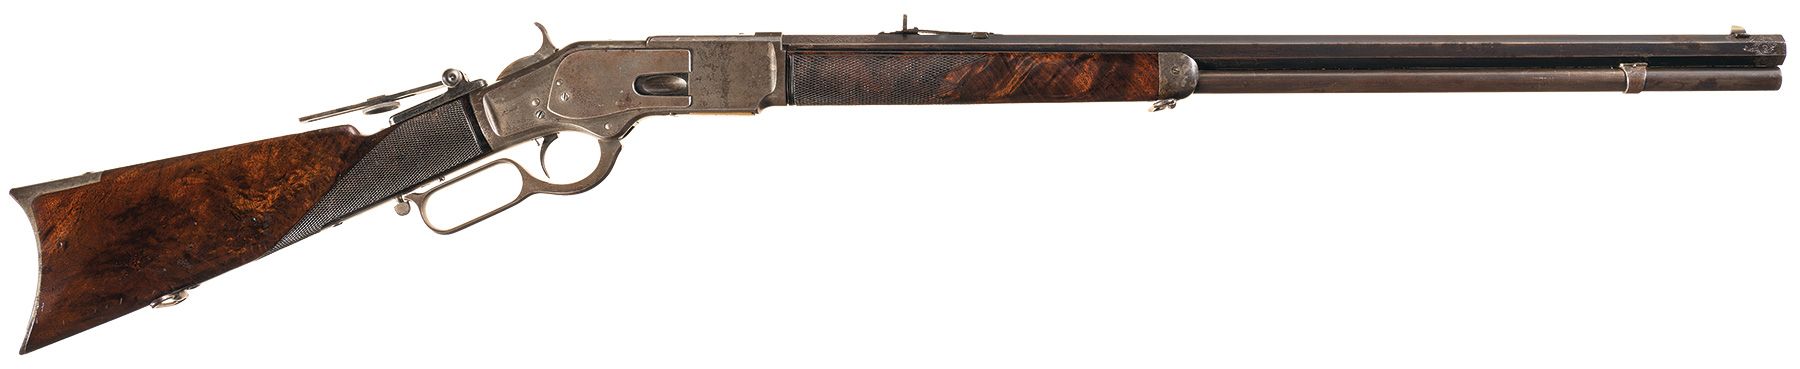 Winchester "One of One Hundred" Model 1873